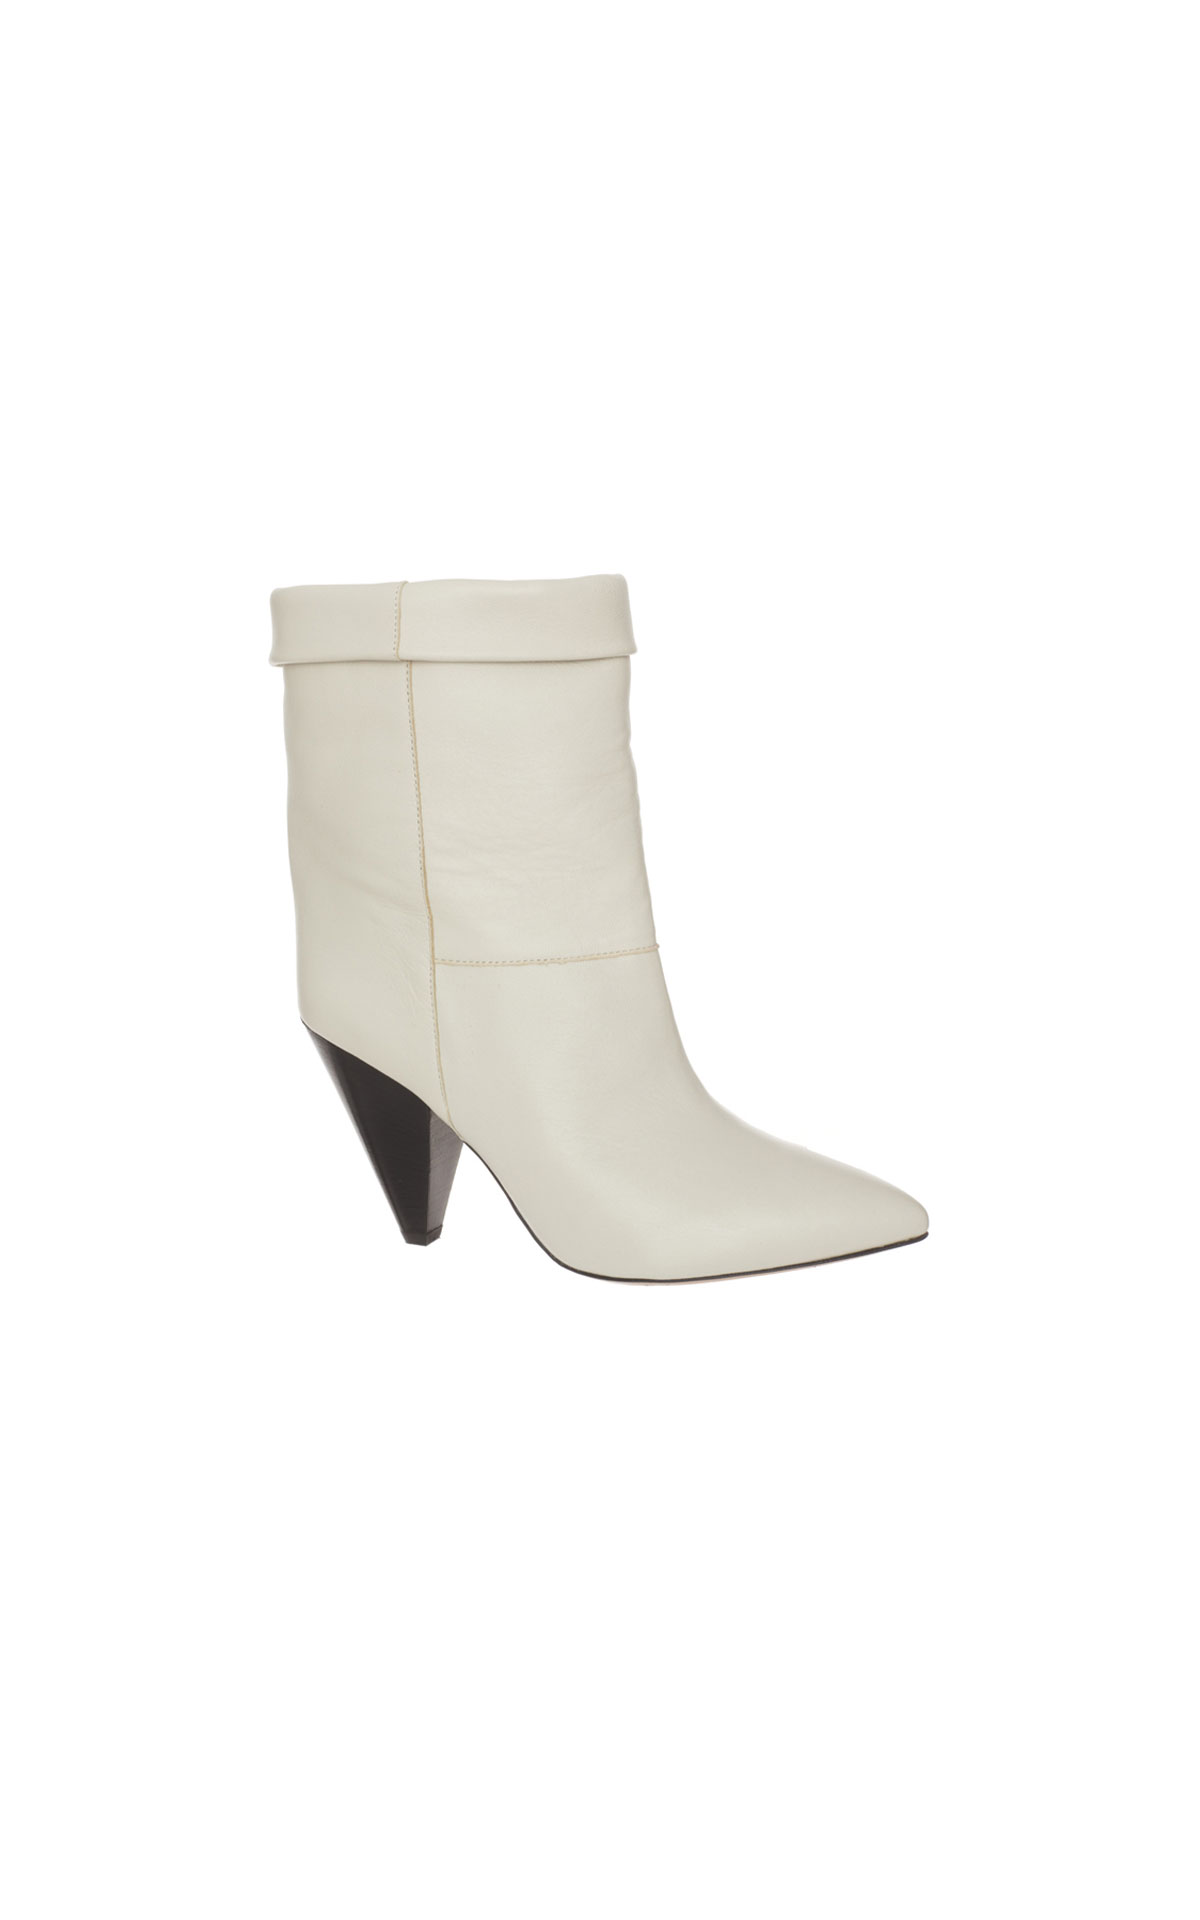 Isabel Marant Luido white boots from Bicester Village